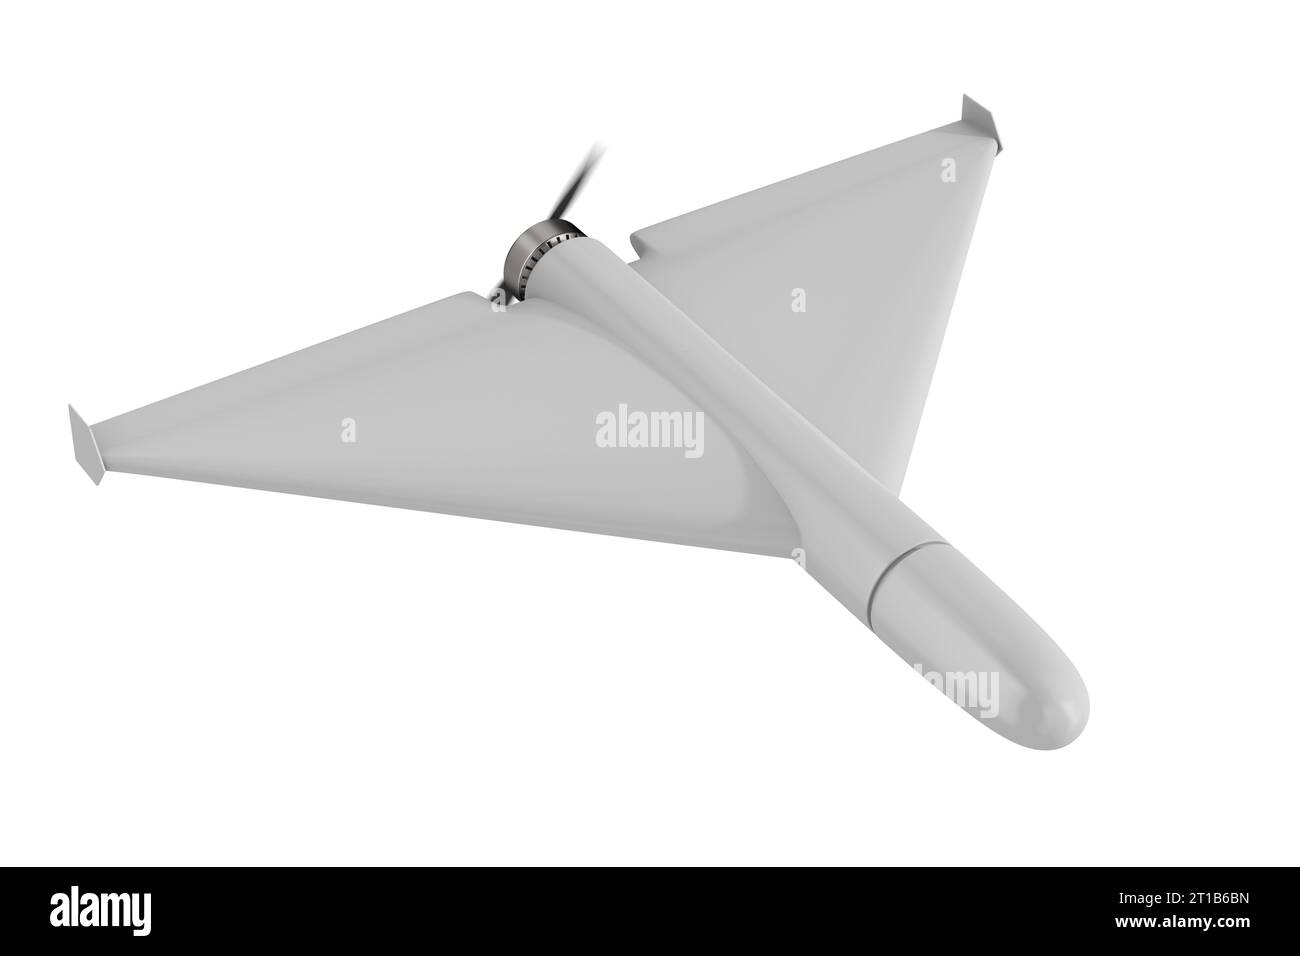 Military drone on white background. Isolated 3d illustration Stock Photo